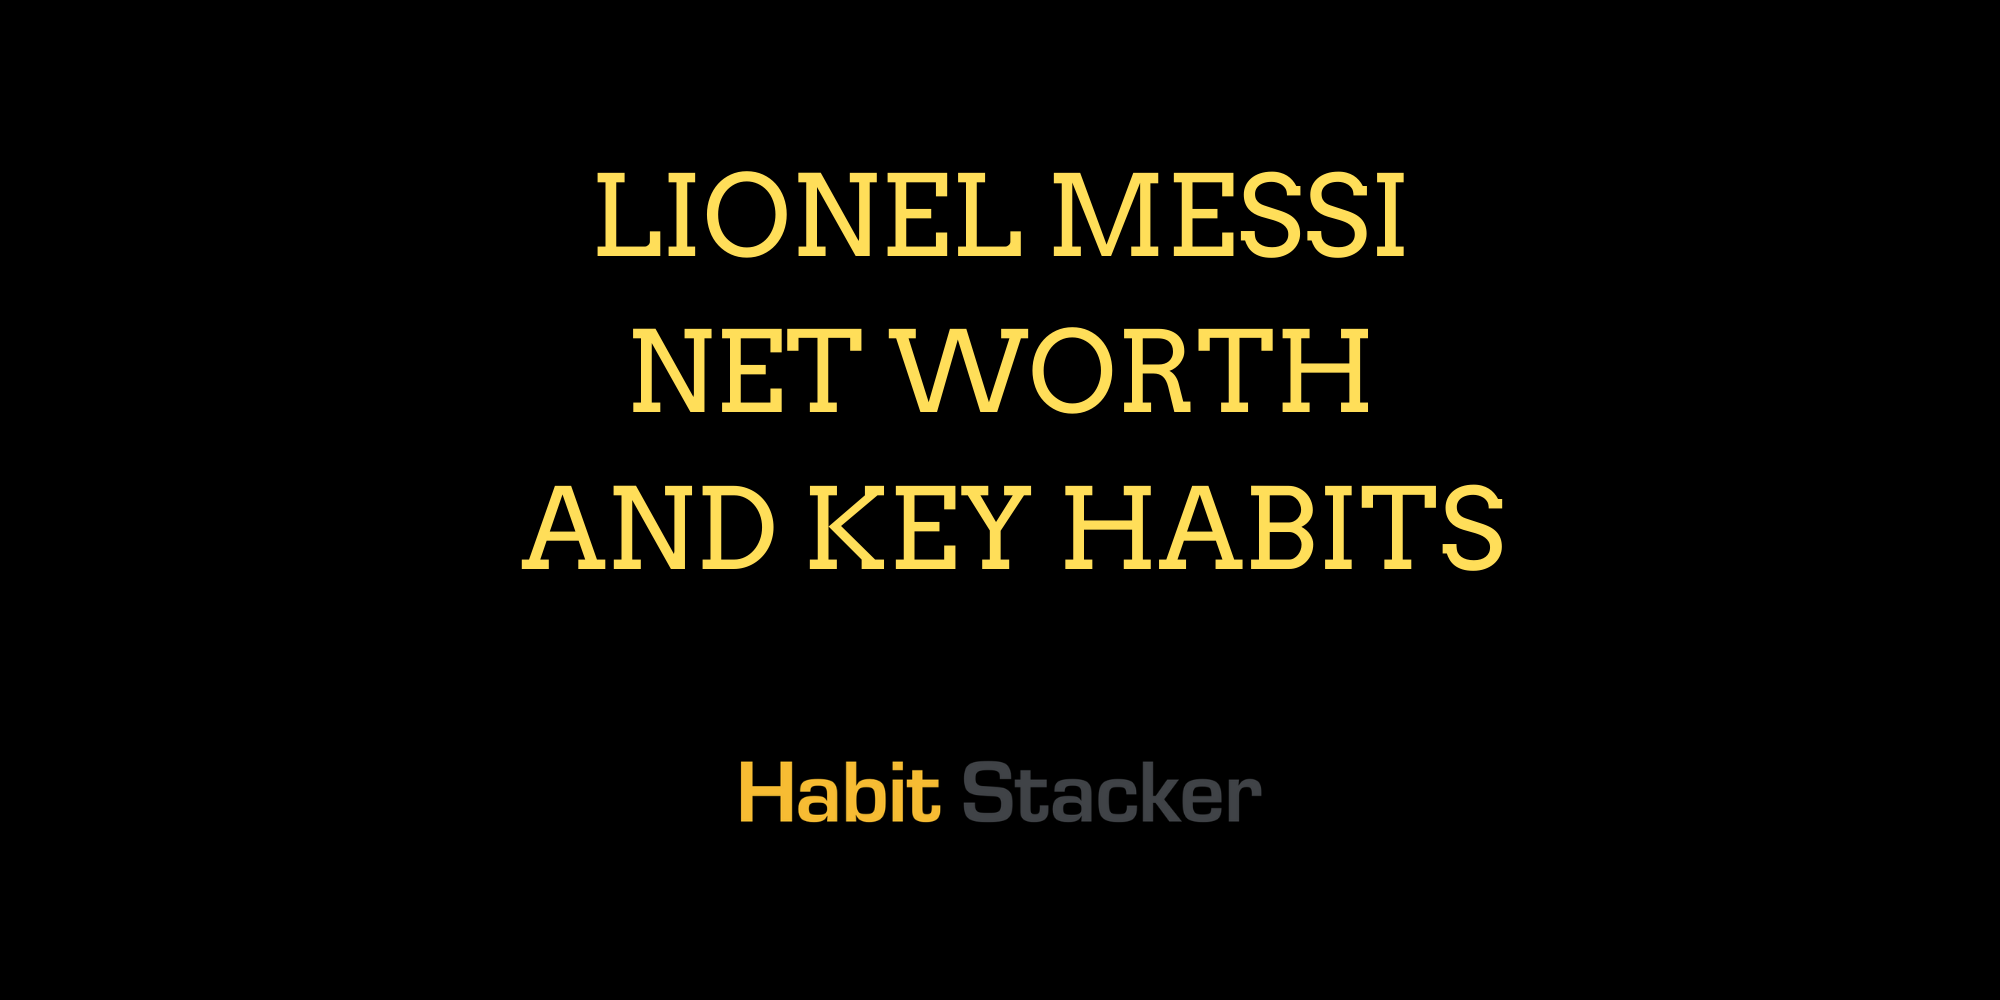 Lionel Messi Net Worth and Key Habits